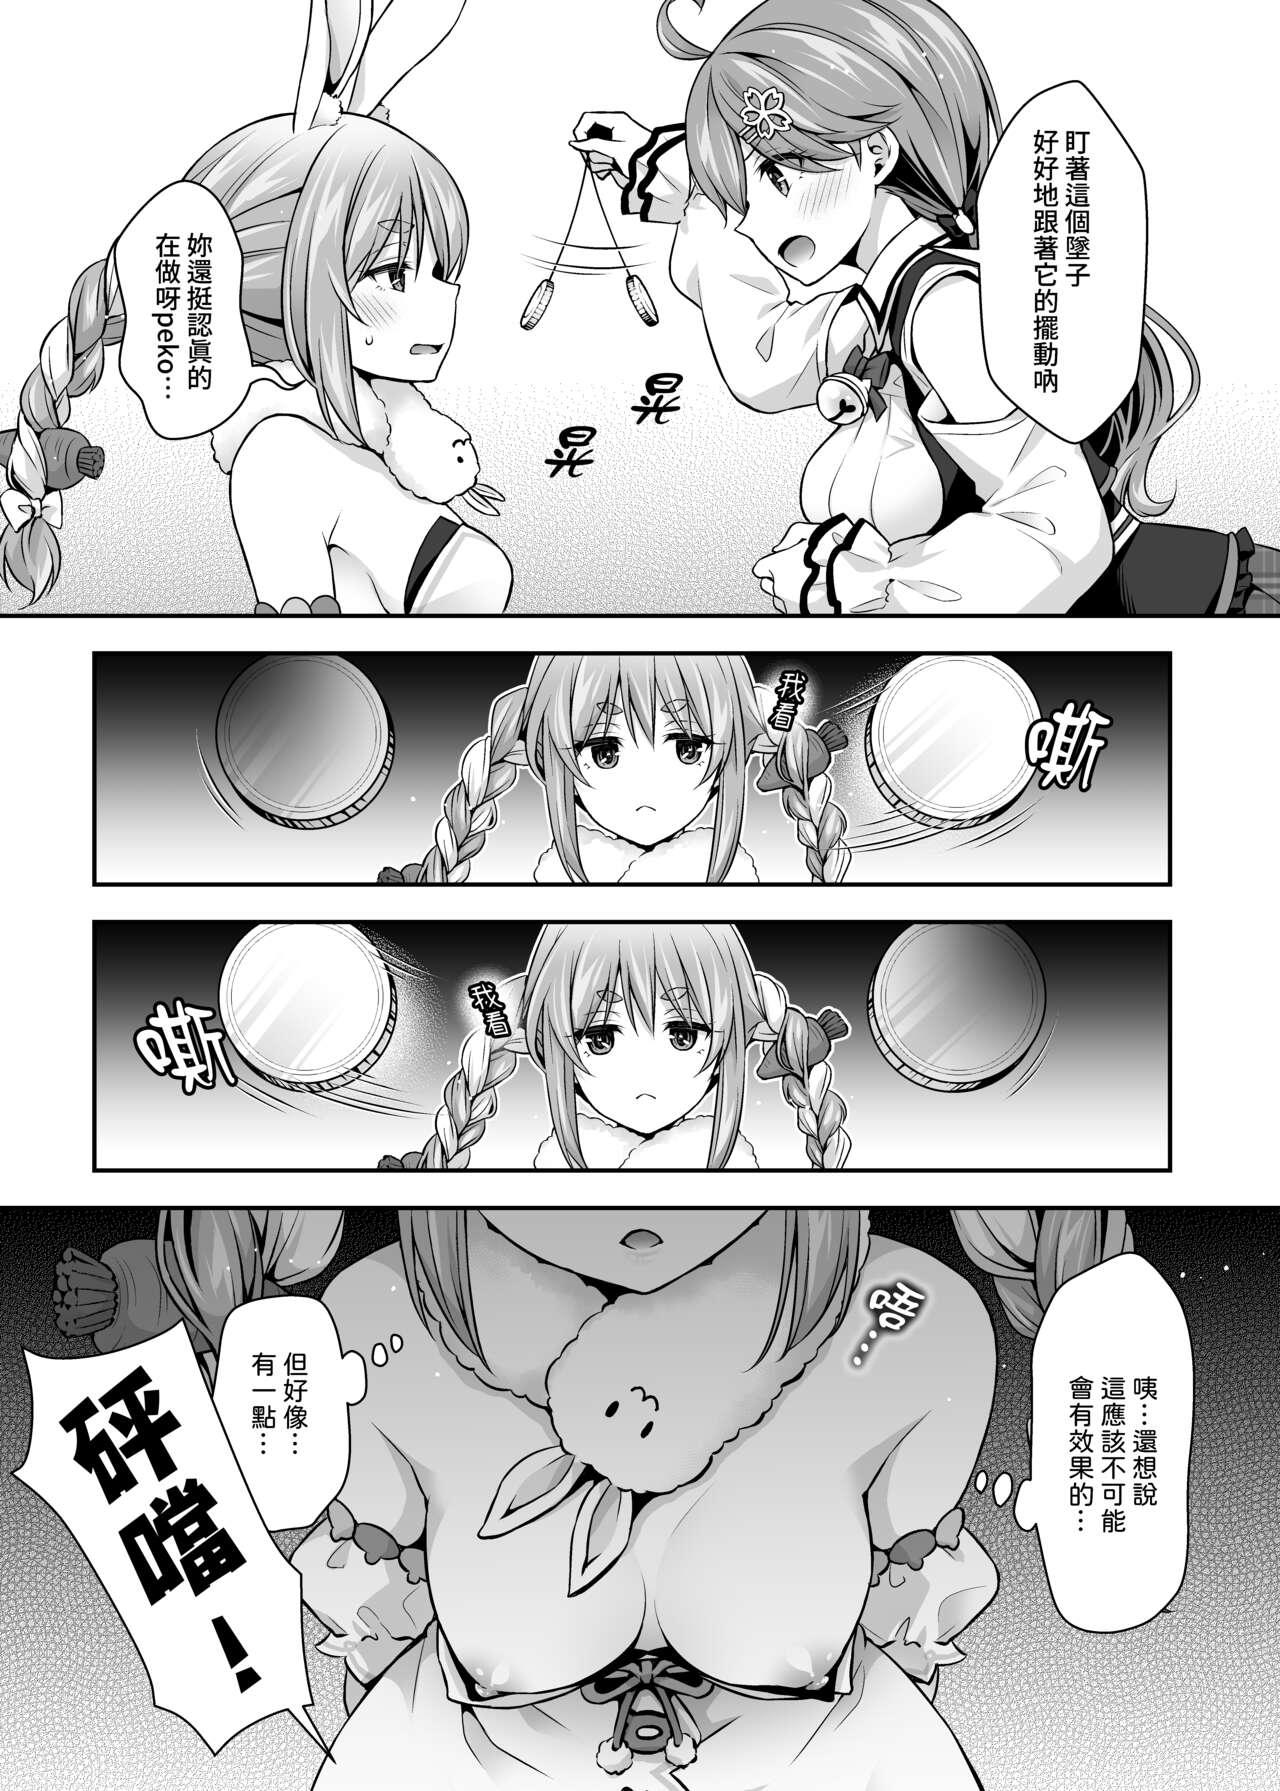 Relax みこち催眠えっち本2 ～悪魔的所業編～ - Hololive Juggs - Page 9